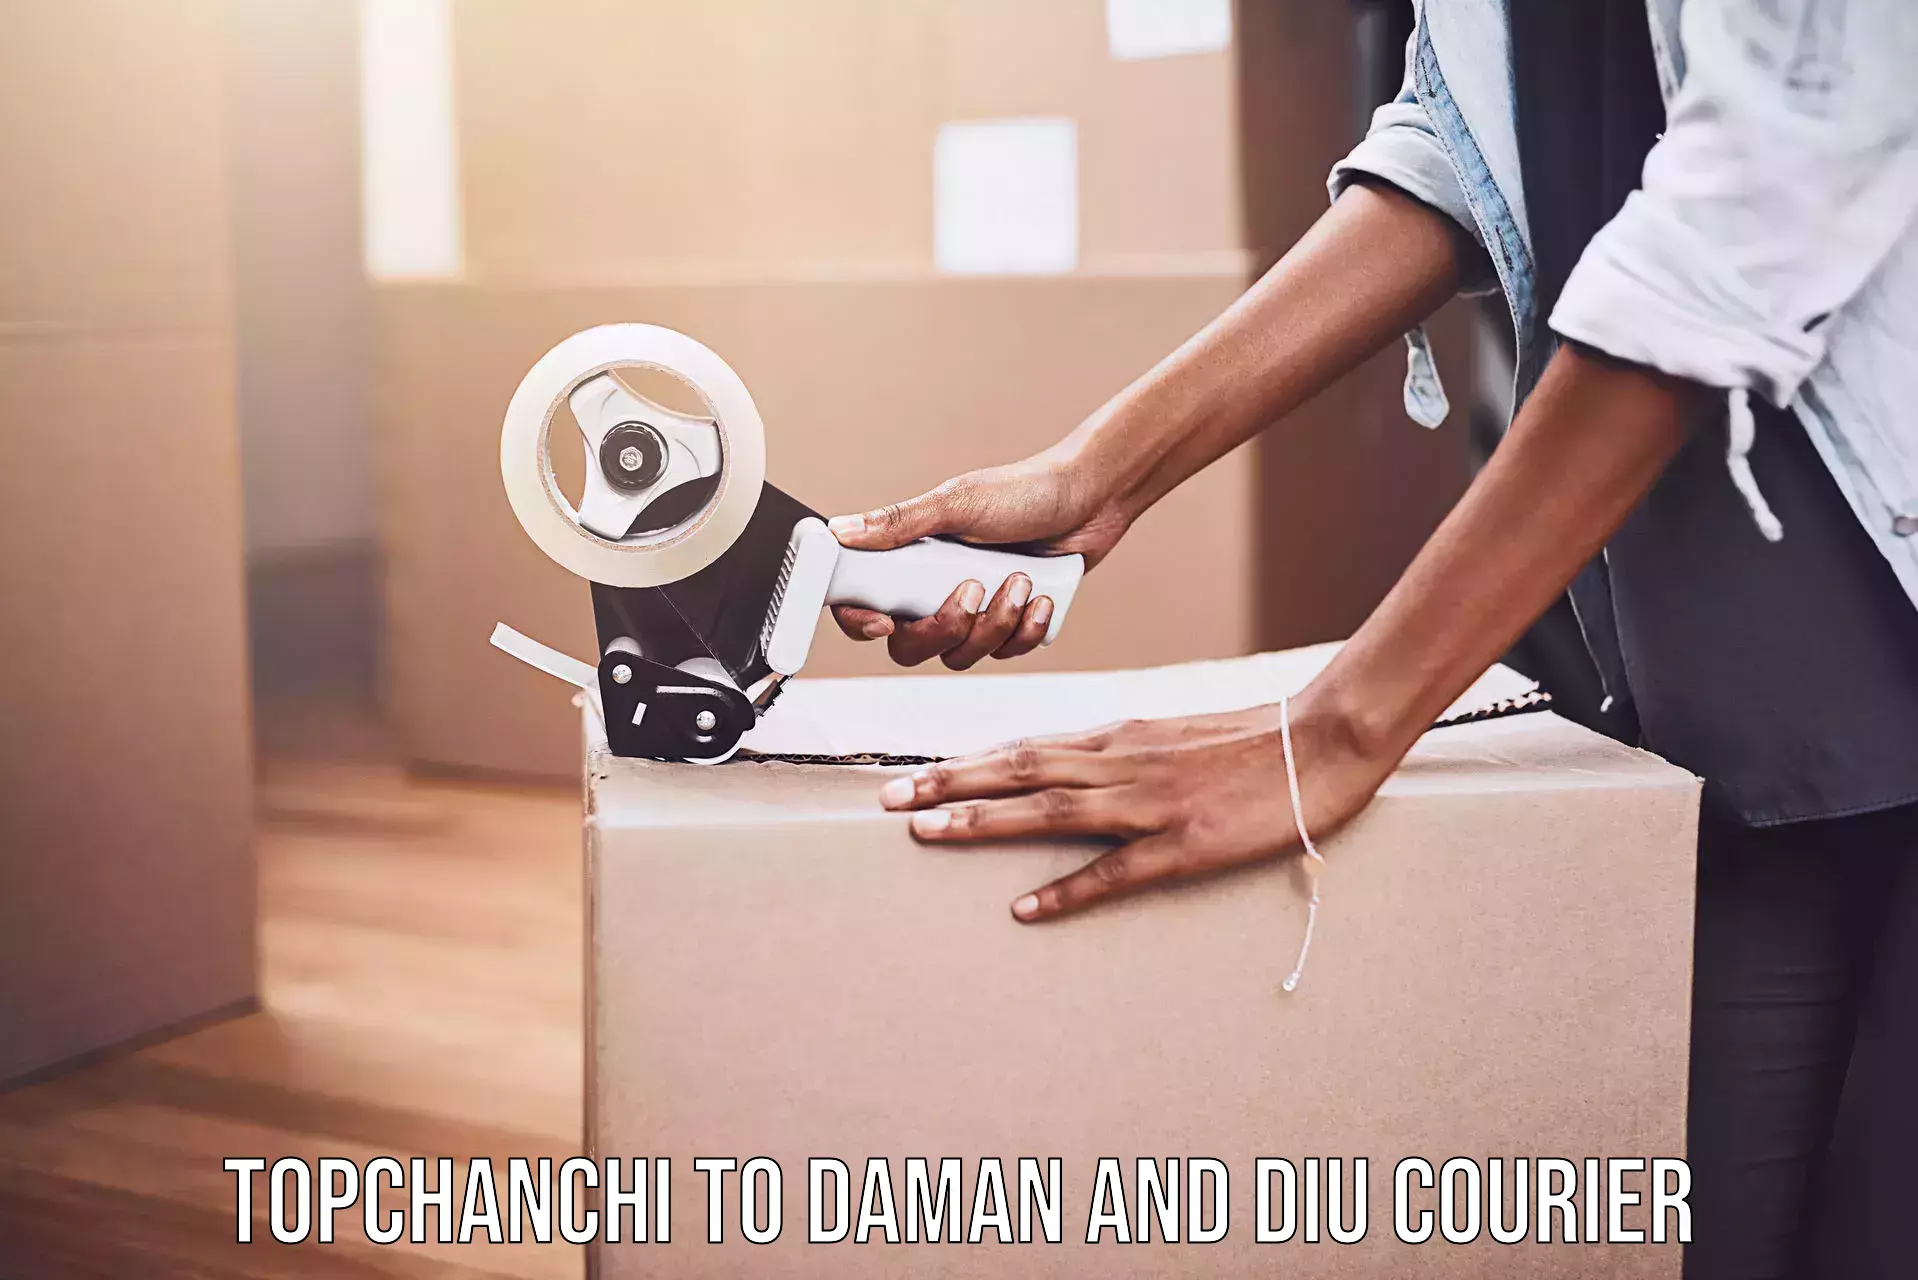 Remote area delivery in Topchanchi to Daman